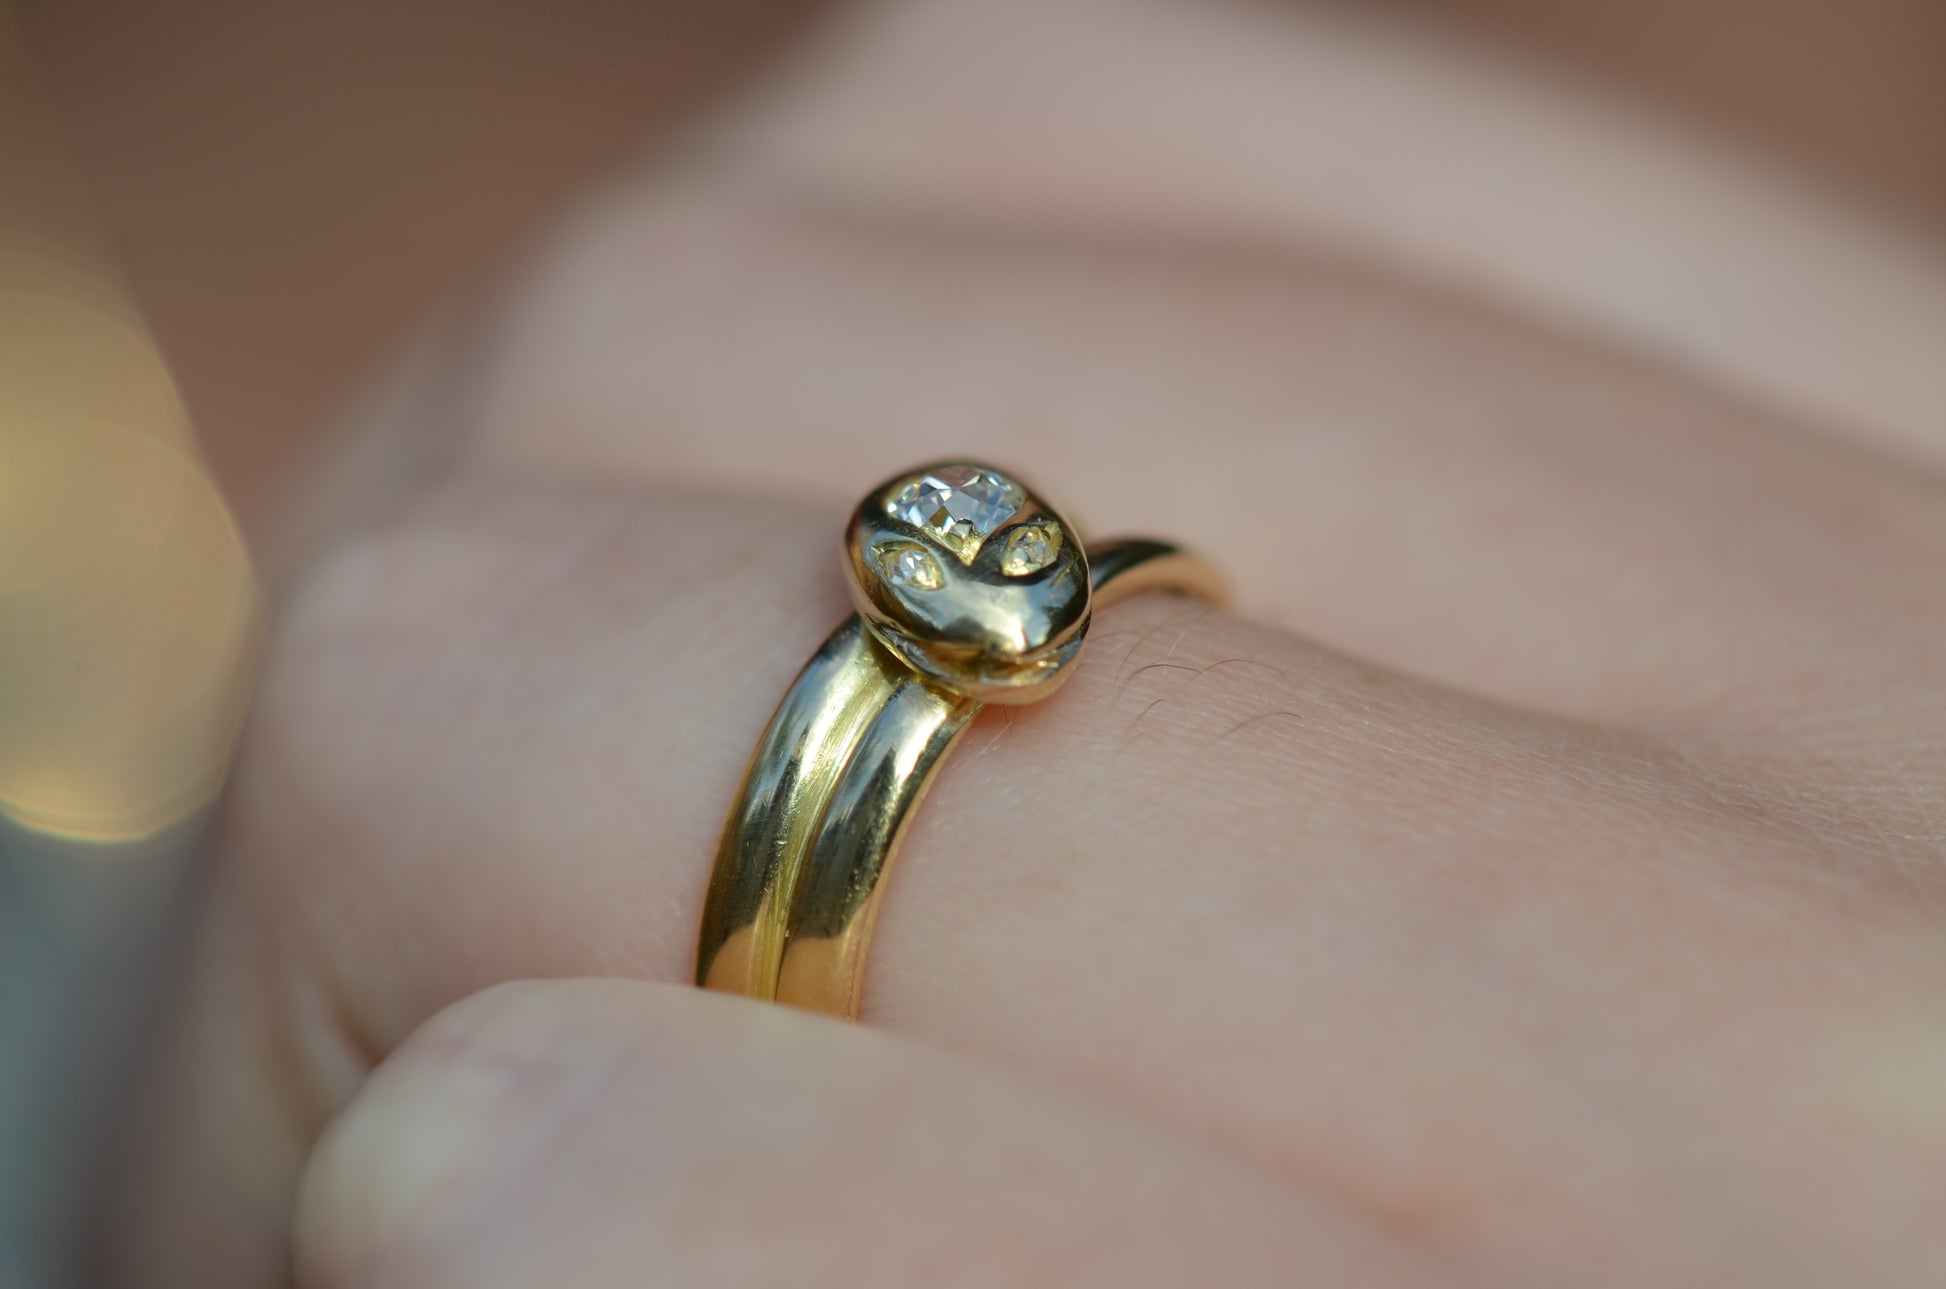 Macro of Victorian yellow gold snake ring with diamond head and eyes shown on the left ring finger of a Caucasian model to demonstrate scale while worn.